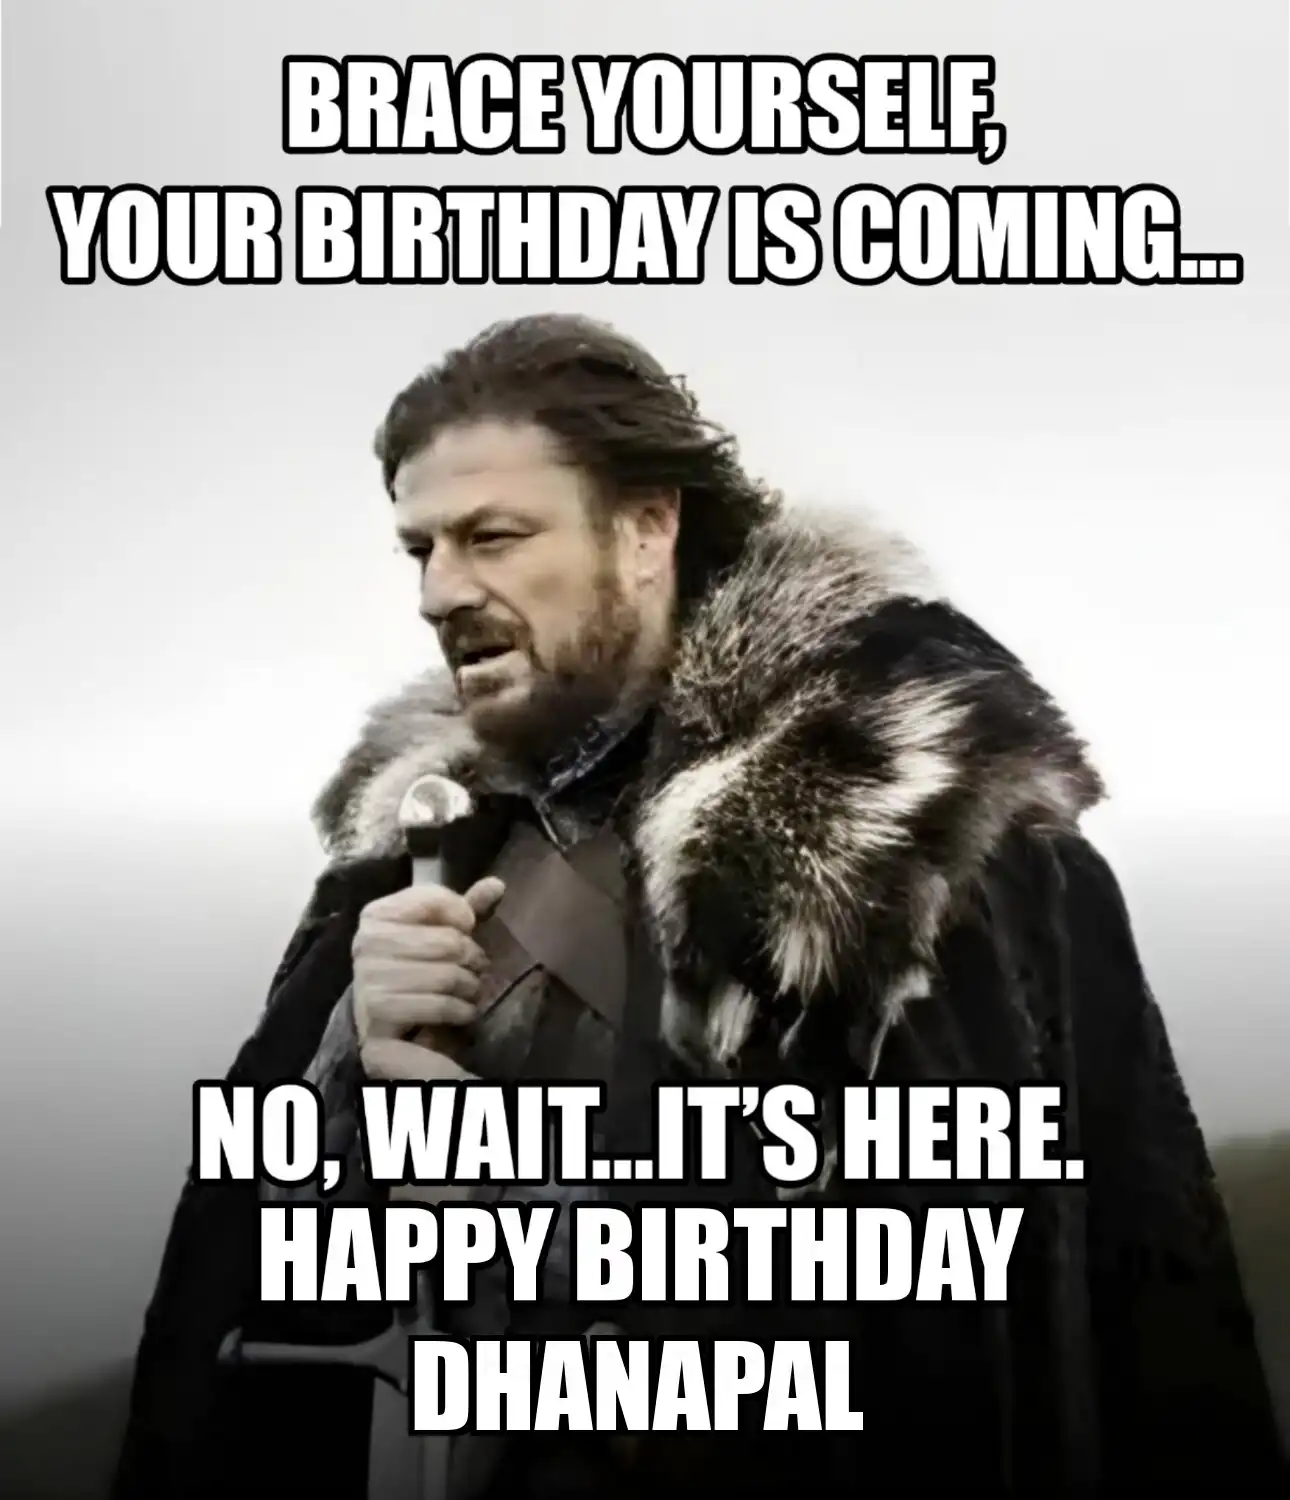 Happy Birthday Dhanapal Brace Yourself Your Birthday Is Coming Meme